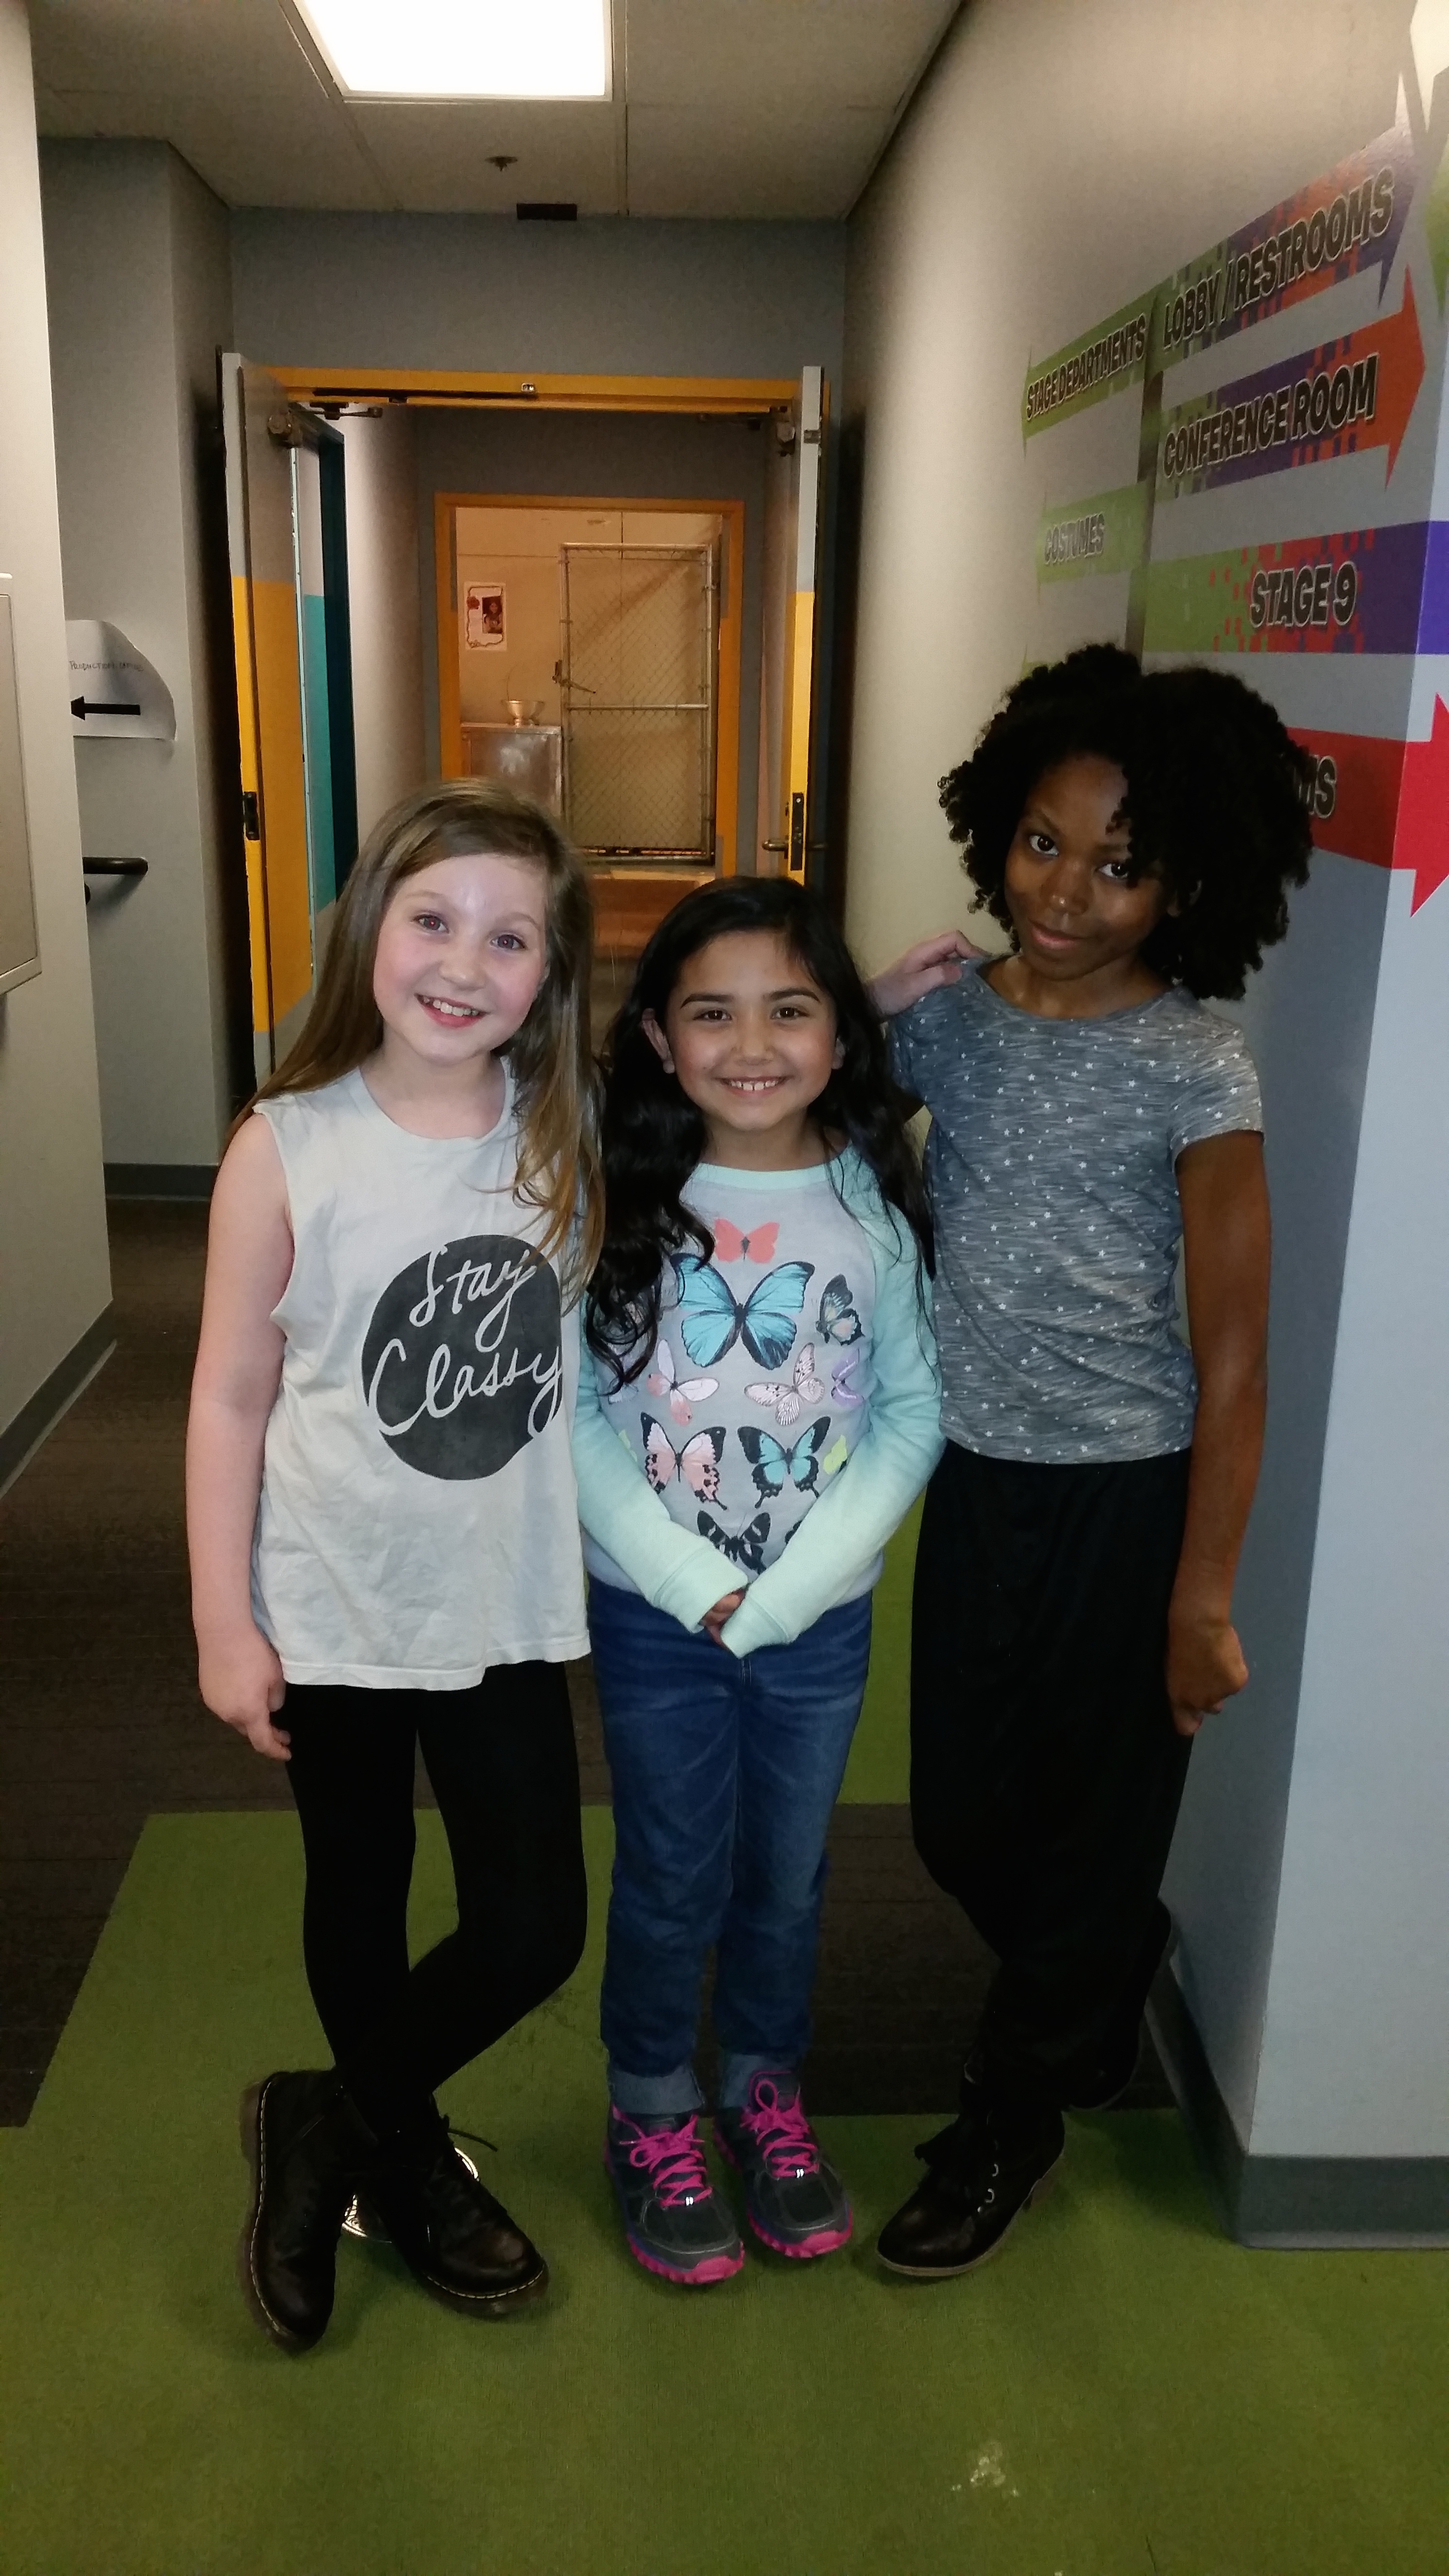 Nickelodeon Studios with Ella Anderson and Riele Downs